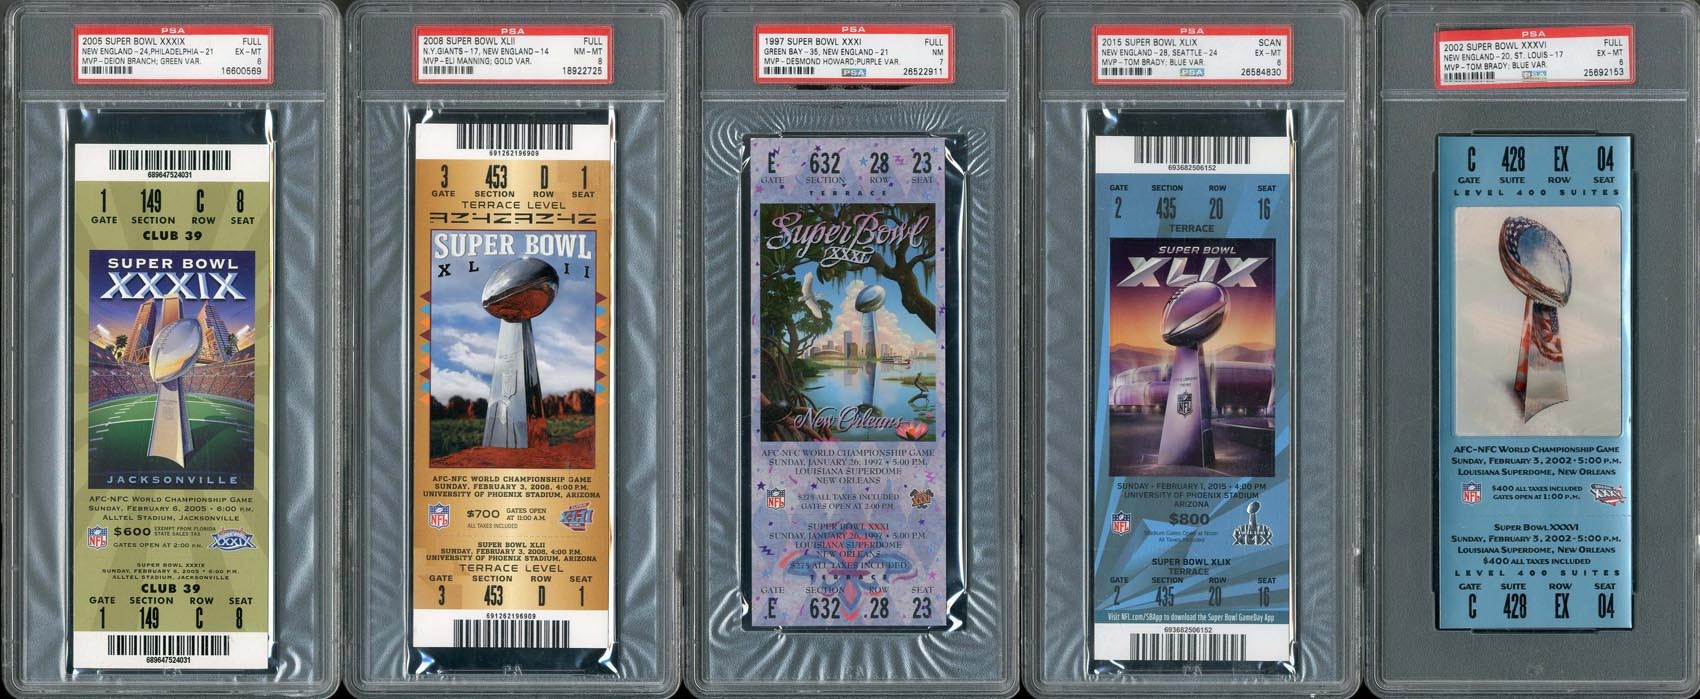 - Every New England Patriots Super Bowl Appearance Ticket Collection (Some PSA Graded)